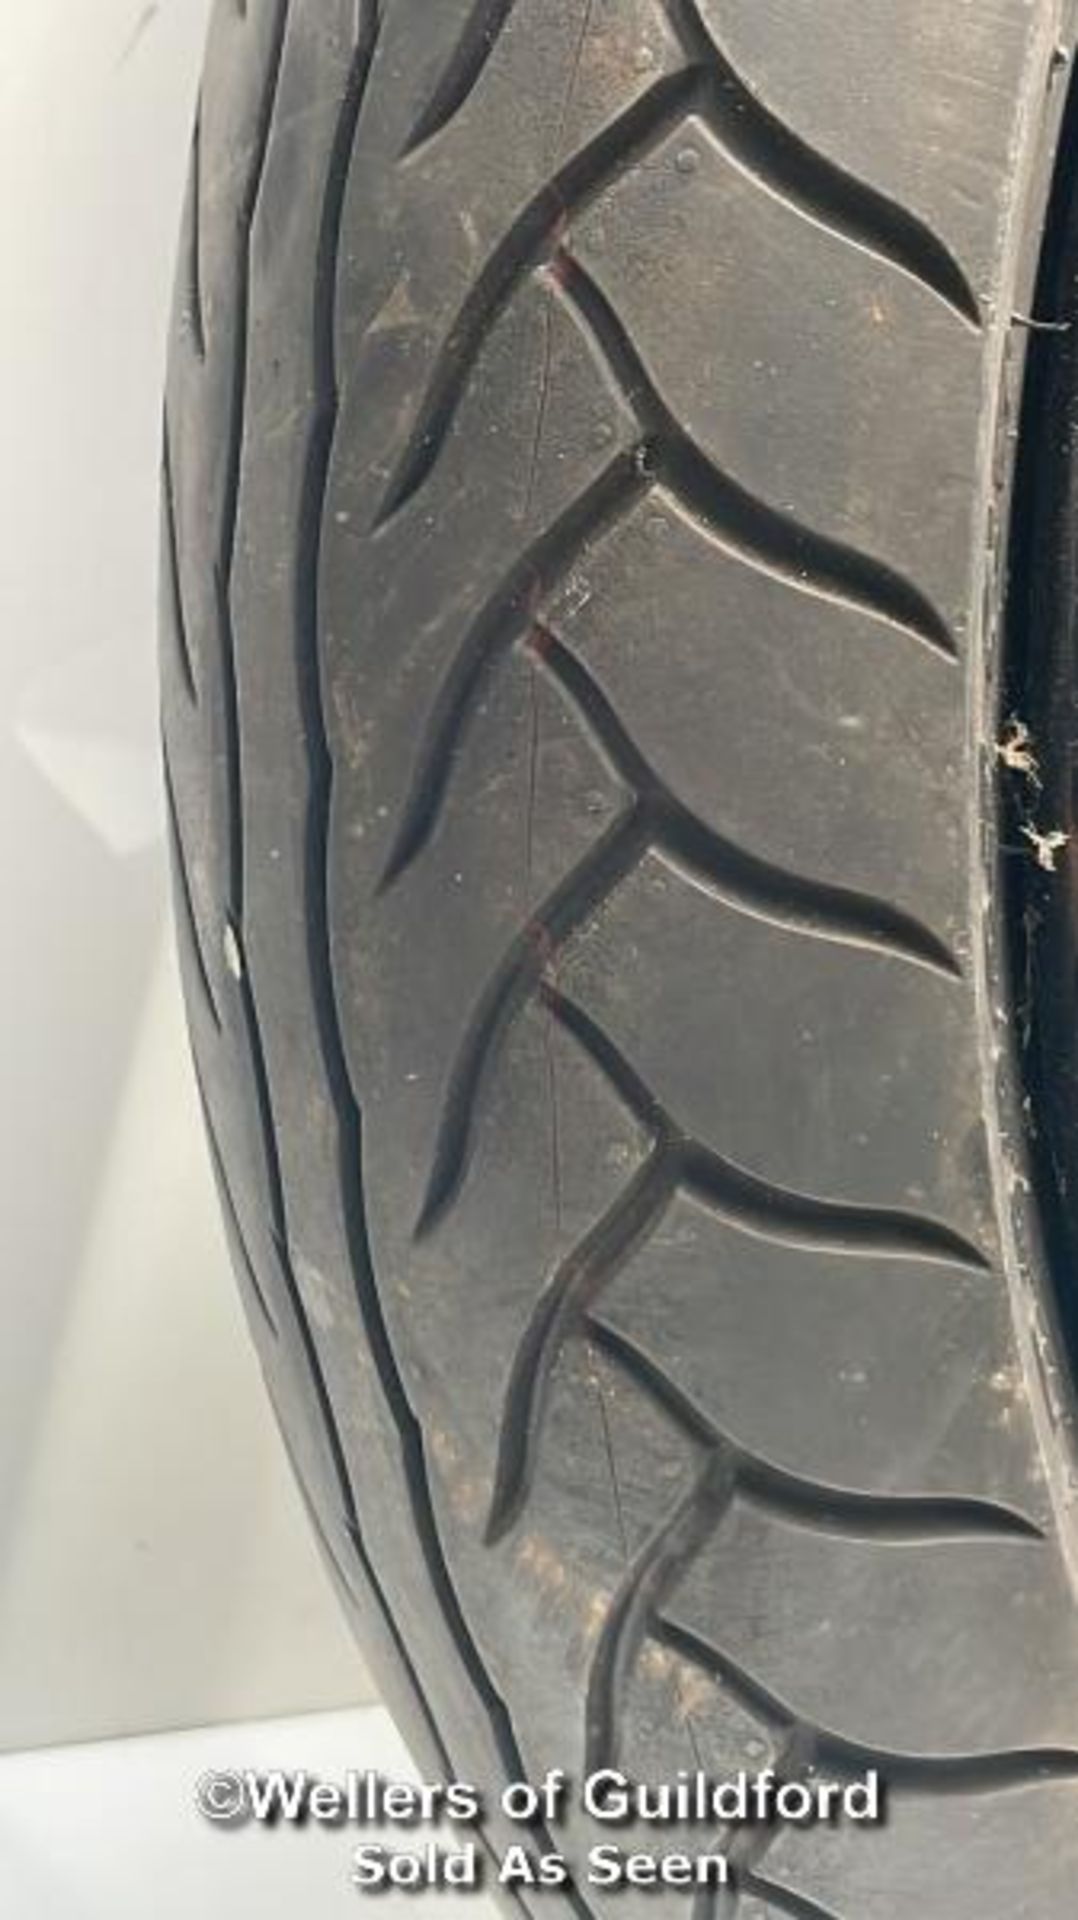 *KAWASAKI EN650 VULCAN S 2015-18 FRONT RIM WHEEL STRAIGHT 18X3.5 / APPEARS IN GOOD, USED CONDITION - Image 5 of 6